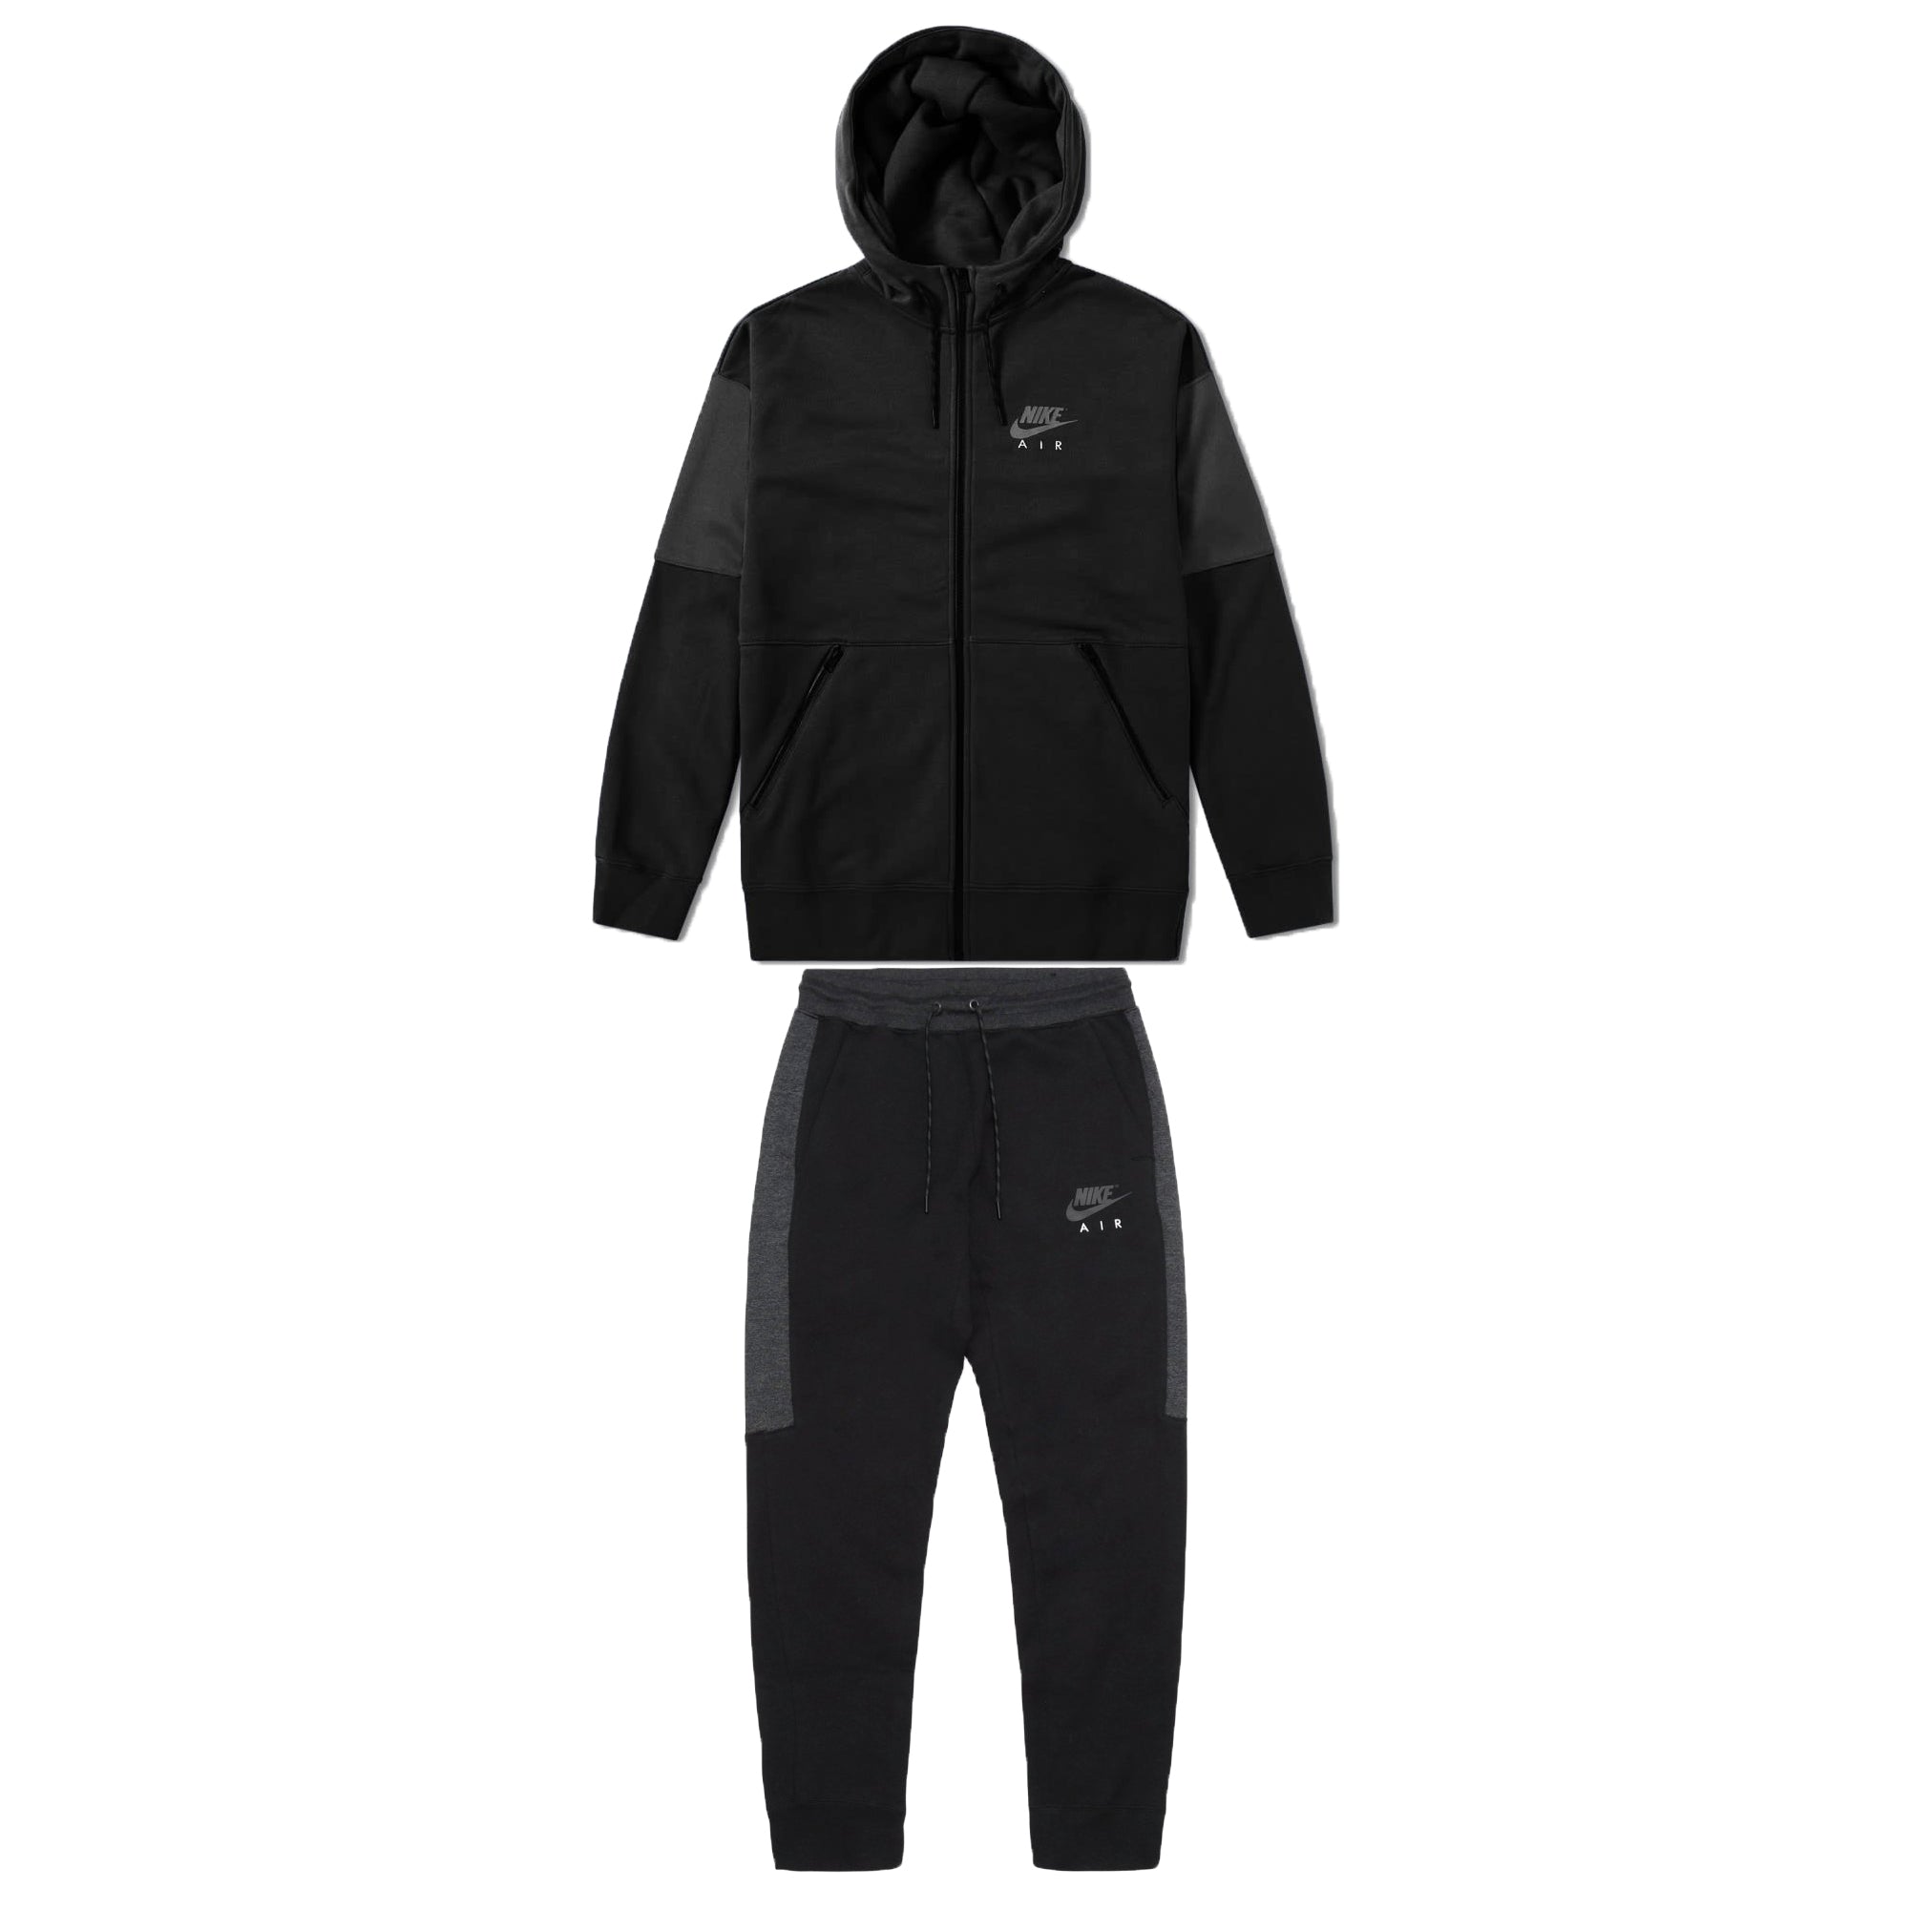 white and black nike tracksuit